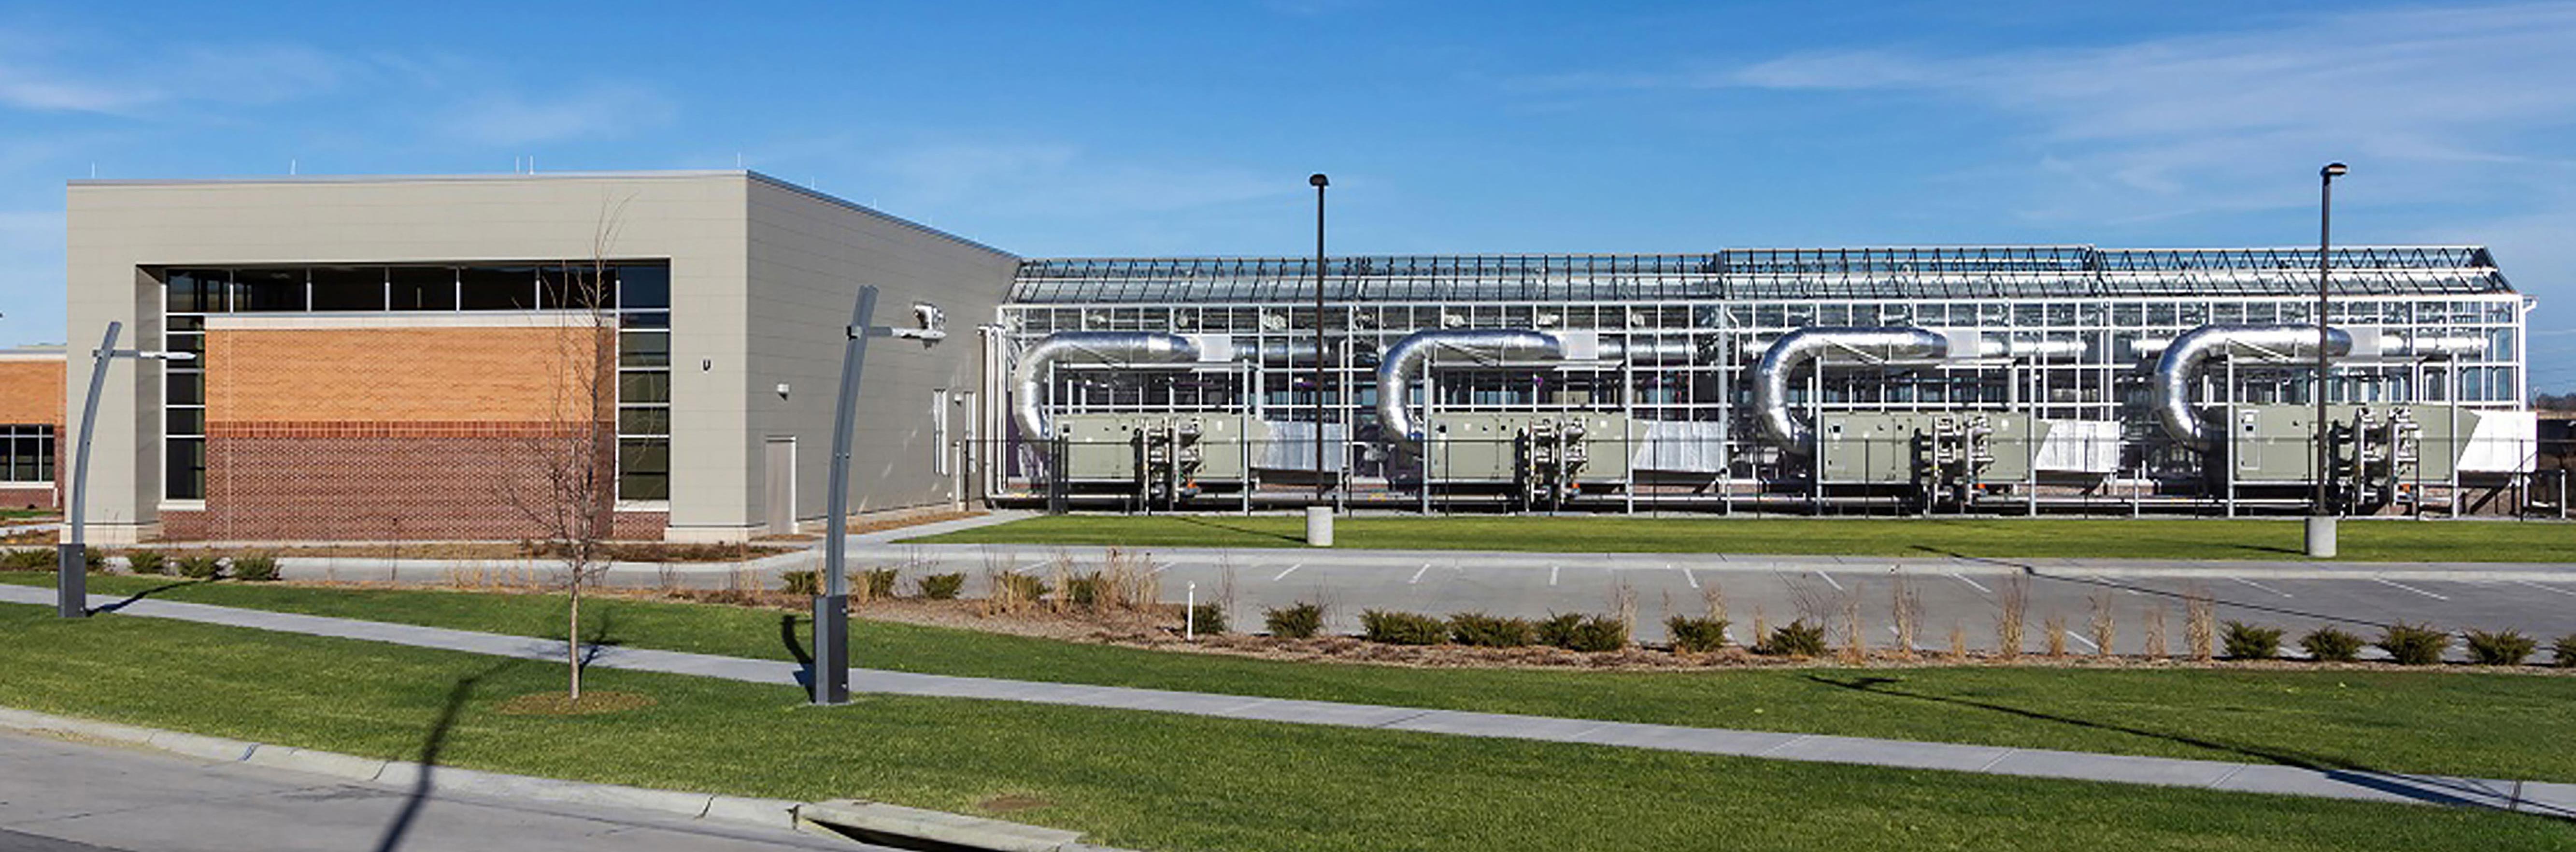 a contemporary greenhouse innovation center on a college campus constructed with large state of the art plumbing, piping and HVAC services